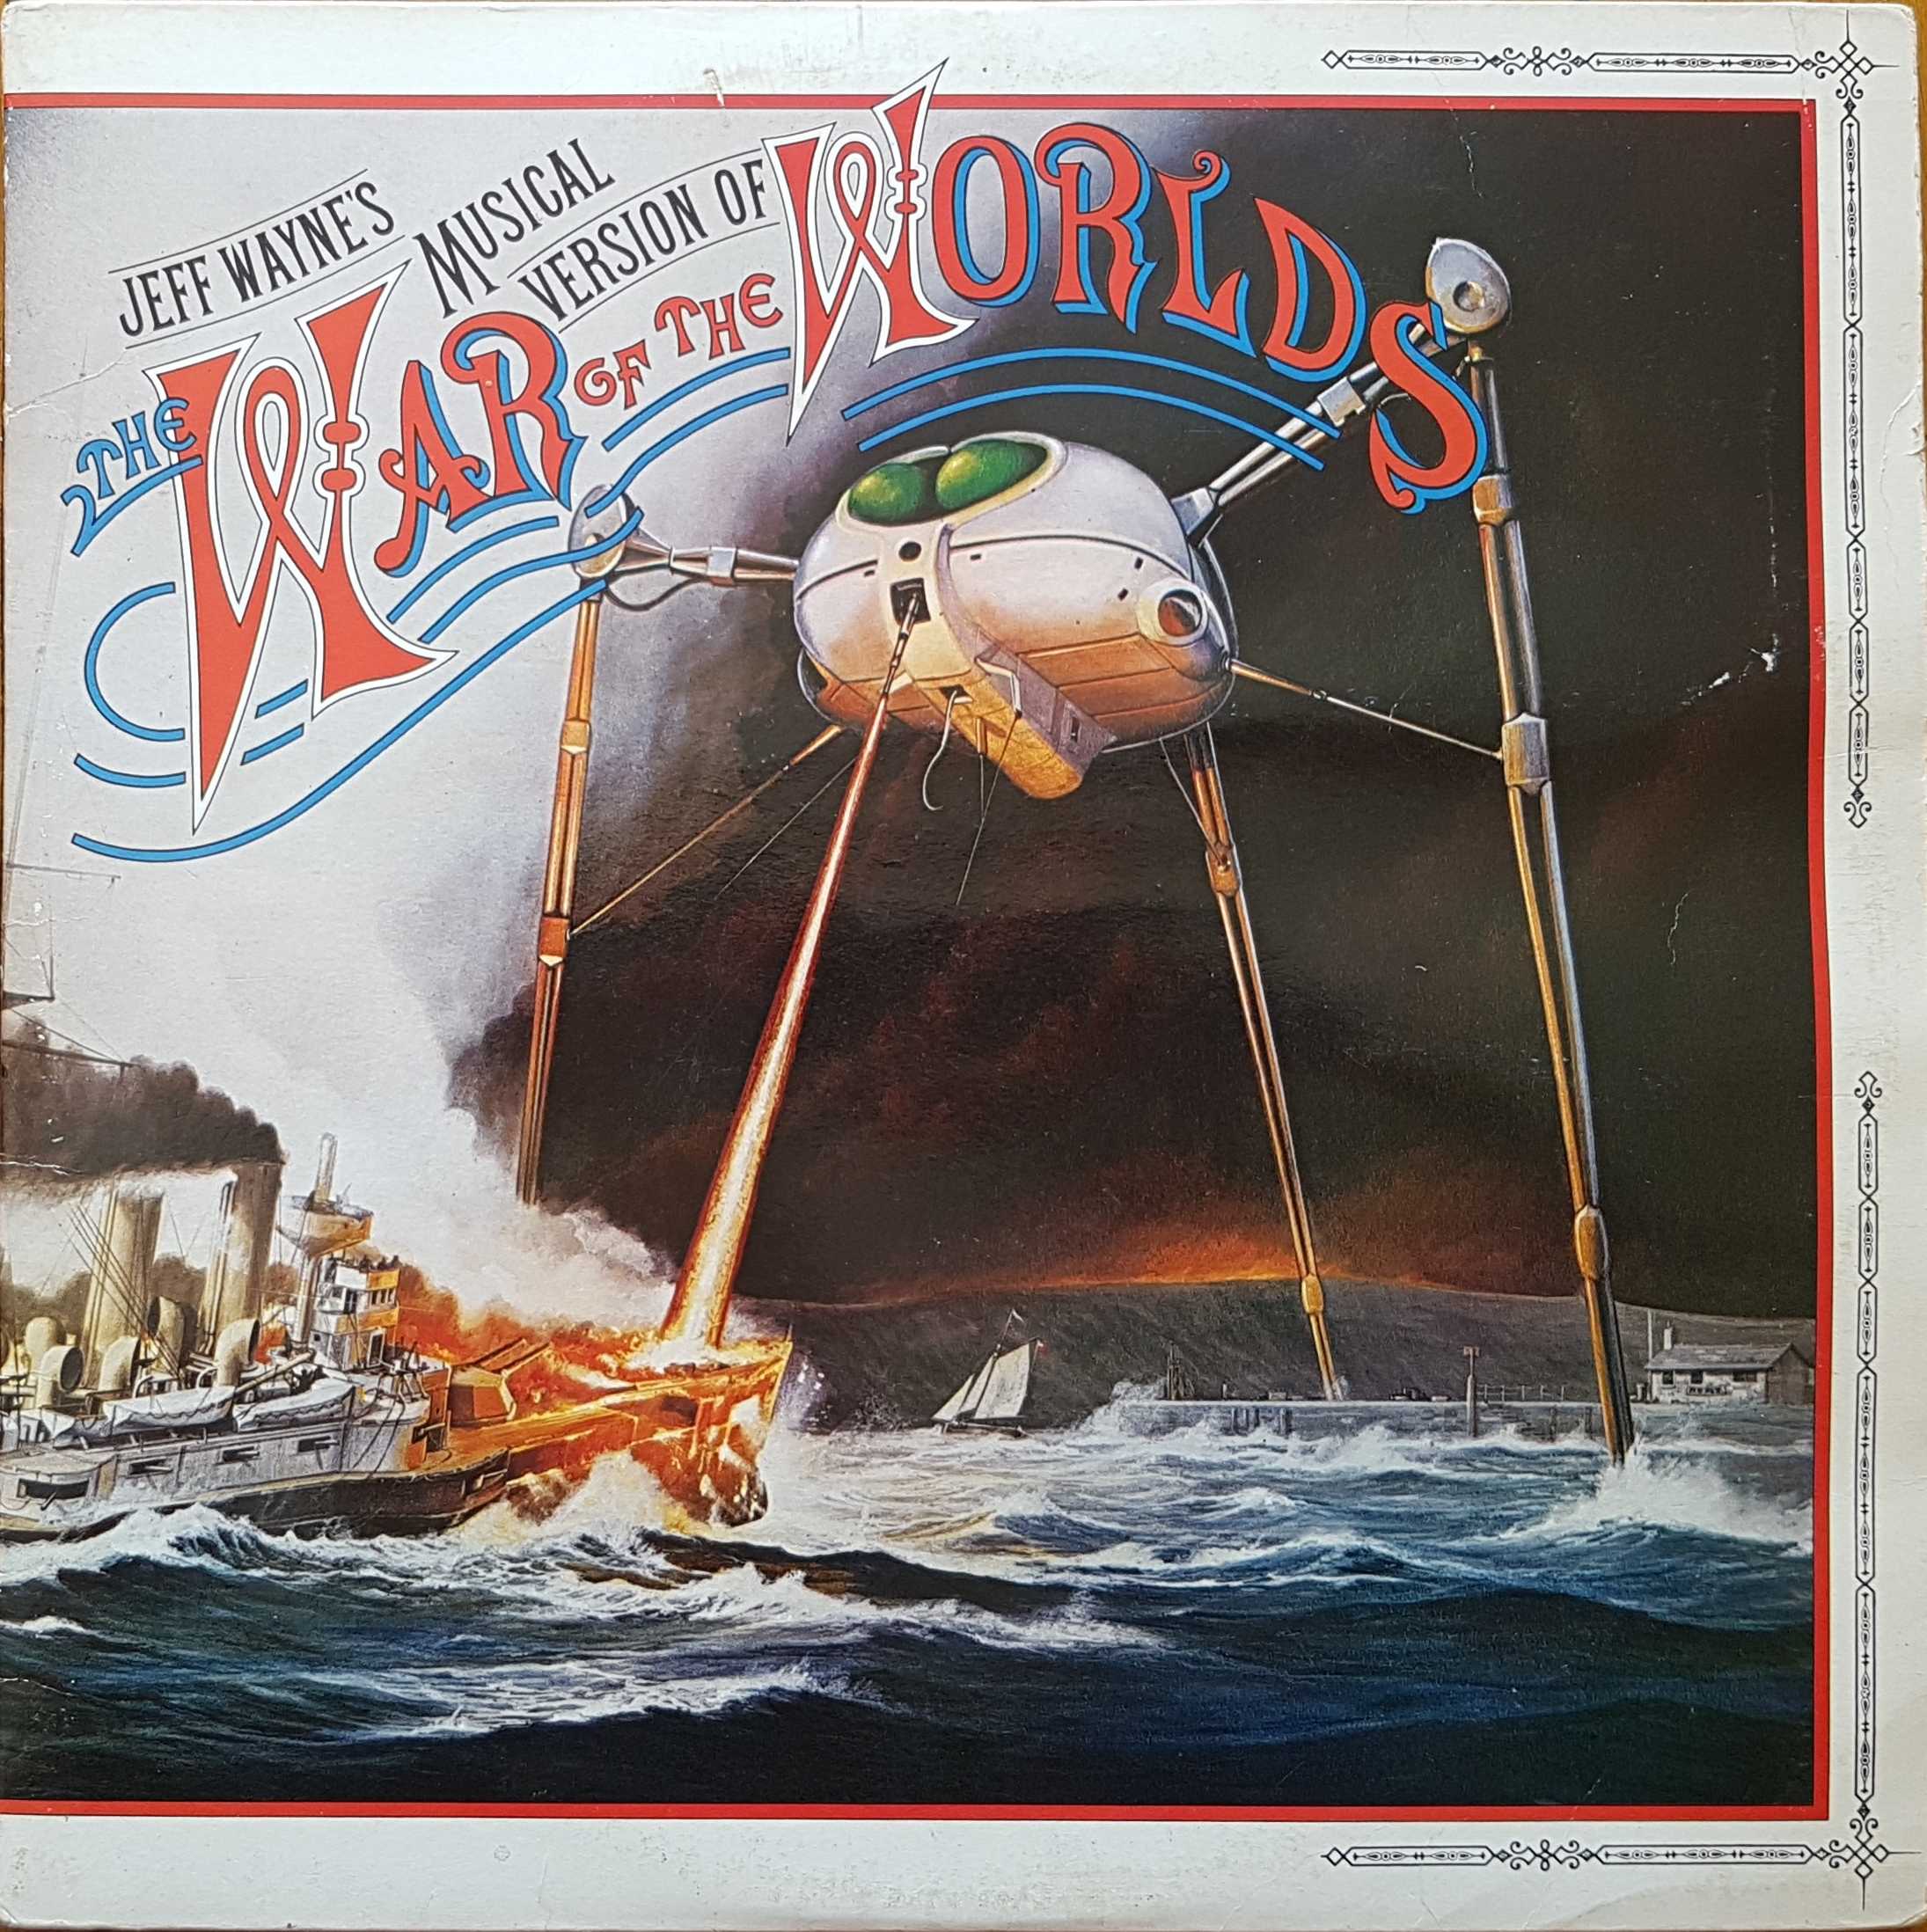 Picture of CBS 96000 War of the Worlds by artist Jeff Wayne from ITV, Channel 4 and Channel 5 albums library